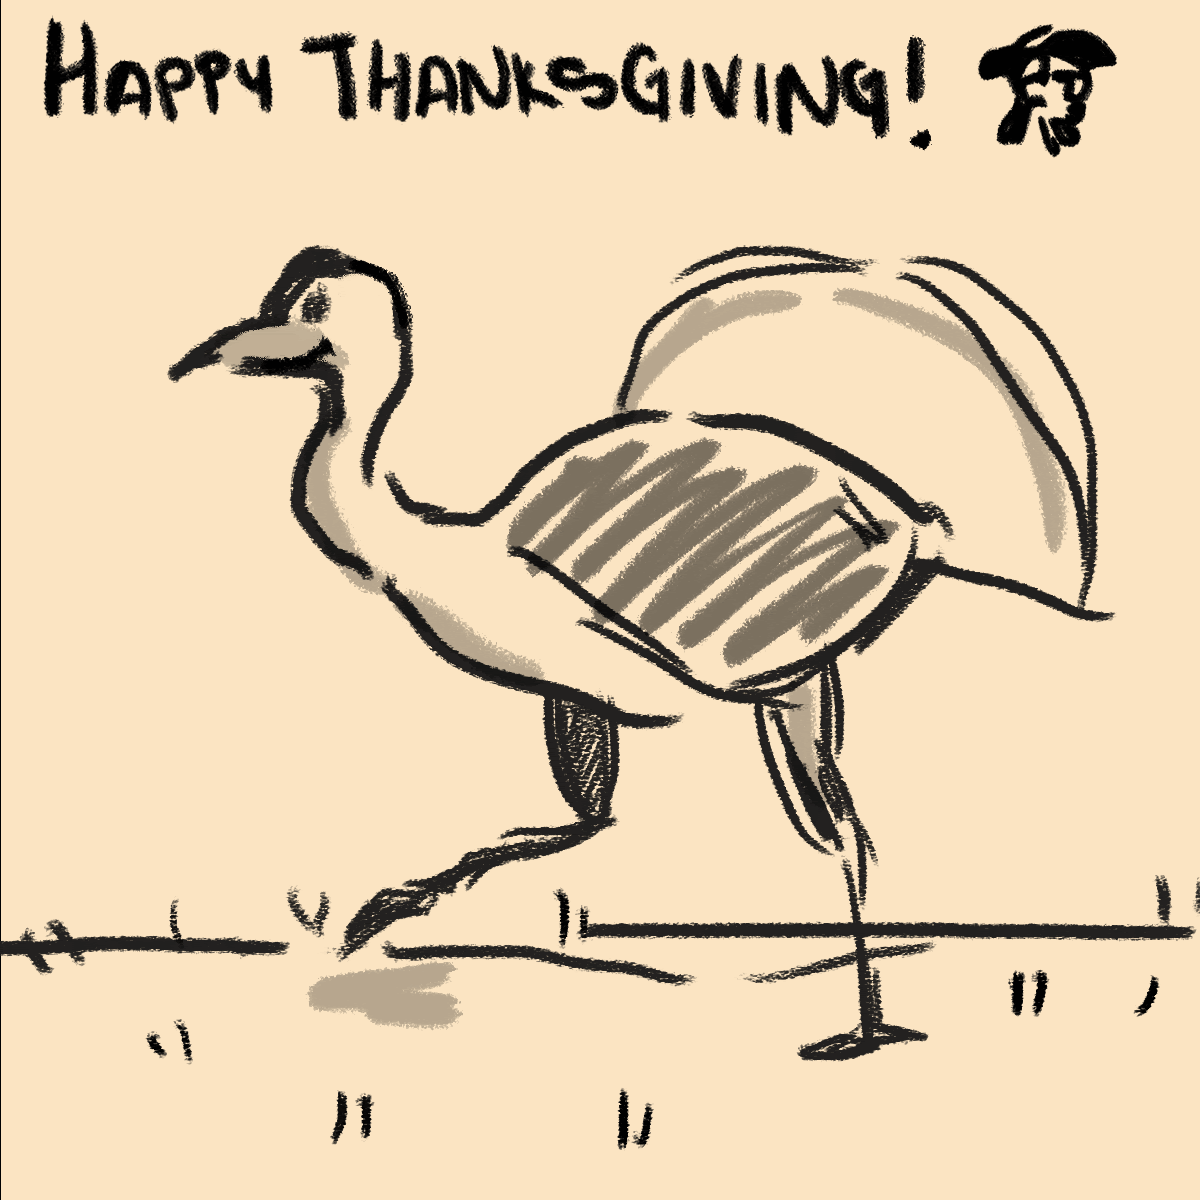 Cam Fox of Acton, a senior in Minuteman's Design and Visual Communications program, created the Thanksgiving "gif" animation seen above.